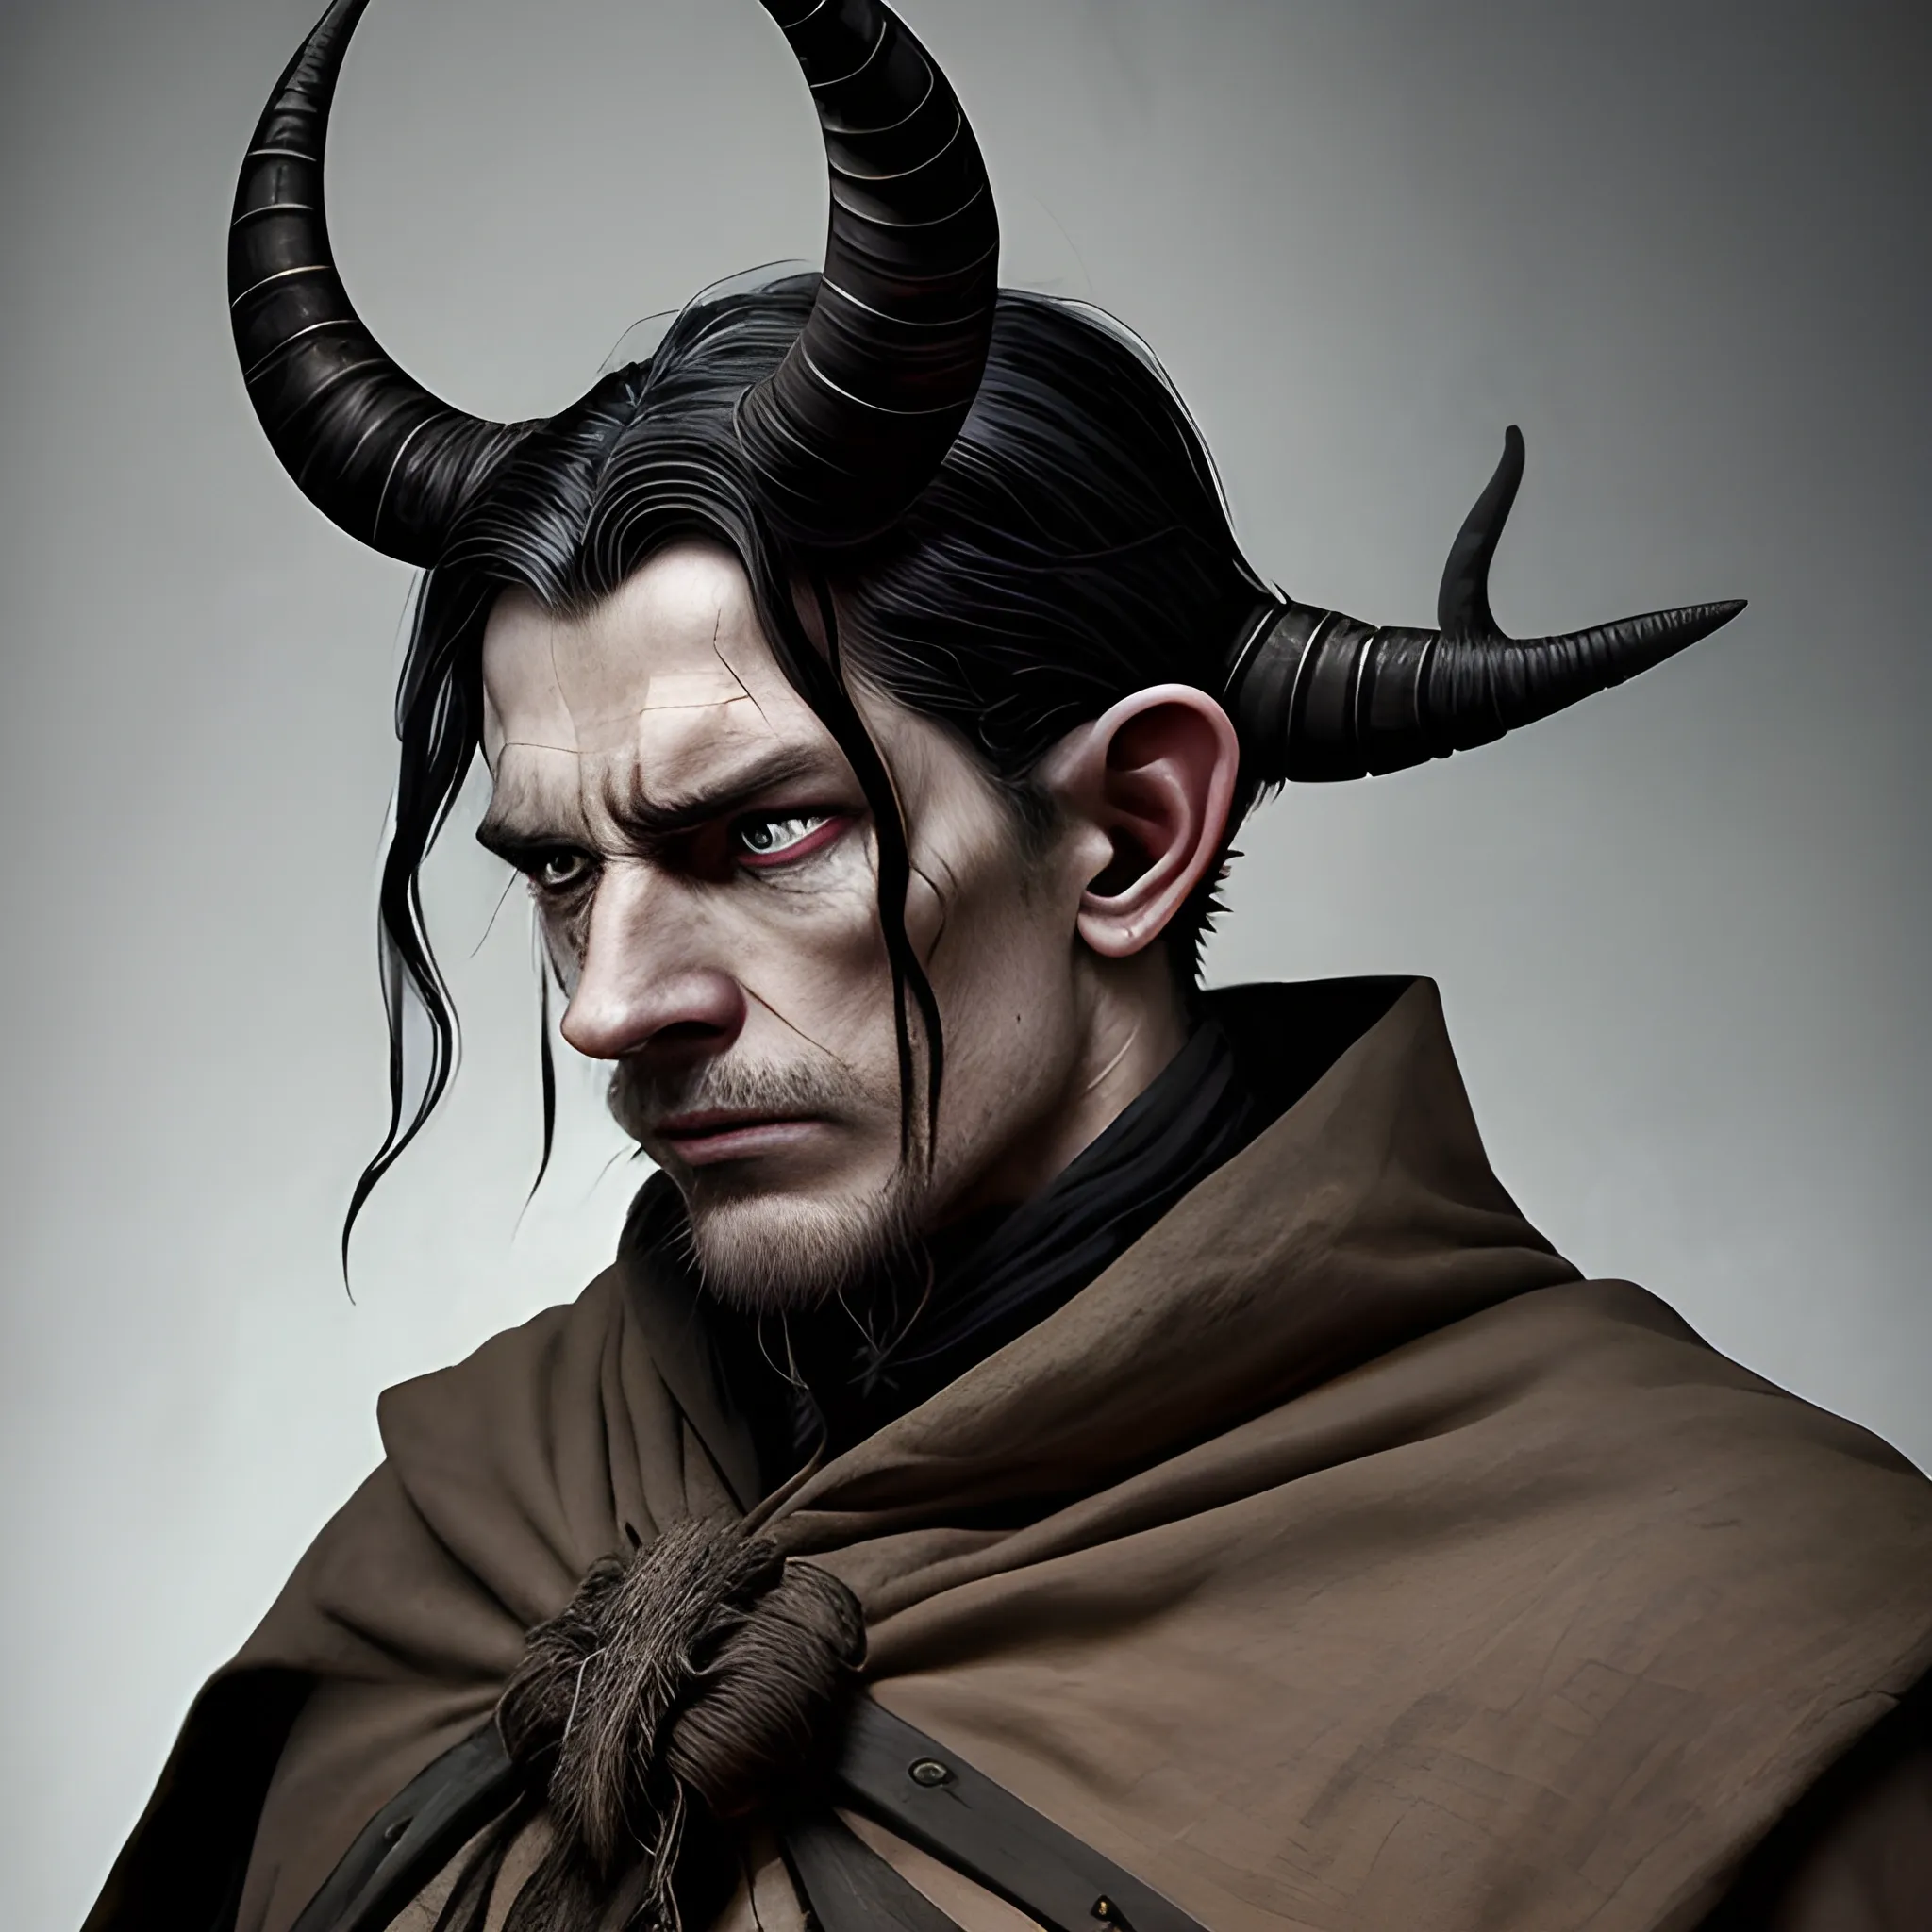 Heinrich stands at a height of around 6 feet, with a lean and athletic build. His Tiefling heritage is evident in his unique physical features, which set him apart from others. His skin bears a deep, ashen hue, reminiscent of charcoal. It feels cool to the touch, hinting at his connection to the realm of the undead. Contrasting with his dusky complexion, his eyes gleam with an intense shade of amber, it lost it' s shines years ago.

A pair of big, curved horns emerge from his forehead, curling back and slightly upwards. They are smooth and polished, a testament to his meticulous care and grooming. Along with his horns, Heinrich possesses a set of pointed, elven-like ears, elongated and tapering to a fine point. His jet-black hair, sleek and straight, falls to his shoulders, framing his face in a sharp and stylish manner.

Heinrich's countenance reflects his sorrowful past. There is a lingering sadness in his eyes, a weight that only comes from carrying the burden of forgotten sins. His facial features are sharp and defined, with a strong jawline that speaks of determination and resolve. However, his expression often bears a hint of weariness and pensiveness, as if he is constantly reflecting on his past actions and seeking answers that lie just beyond his reach.

Dressed in practical and nondescript attire, Heinrich favors dark, muted colors such as deep blues, grays, and blacks. He dons a long, weathered cloak that helps him blend into the shadows, its tattered edges revealing the signs of countless journeys and battles. His armor, made from lightweight materials, allows for agile movement without compromising protection. Strapped to his back is a well-crafted bow, accompanied by a quiver of arrows, emphasizing his skill as a ranger.

Heinrich carries himself with a quiet confidence, though there is an air of restraint about him. He moves with grace and precision, every step deliberate and measured. Though his appearance may evoke a sense of mystery and apprehension in those unfamiliar with Tieflings, those who take the time to know him will find a soul burdened by the weight of past transgressions, seeking redemption in a world that is both harsh and forgiving.